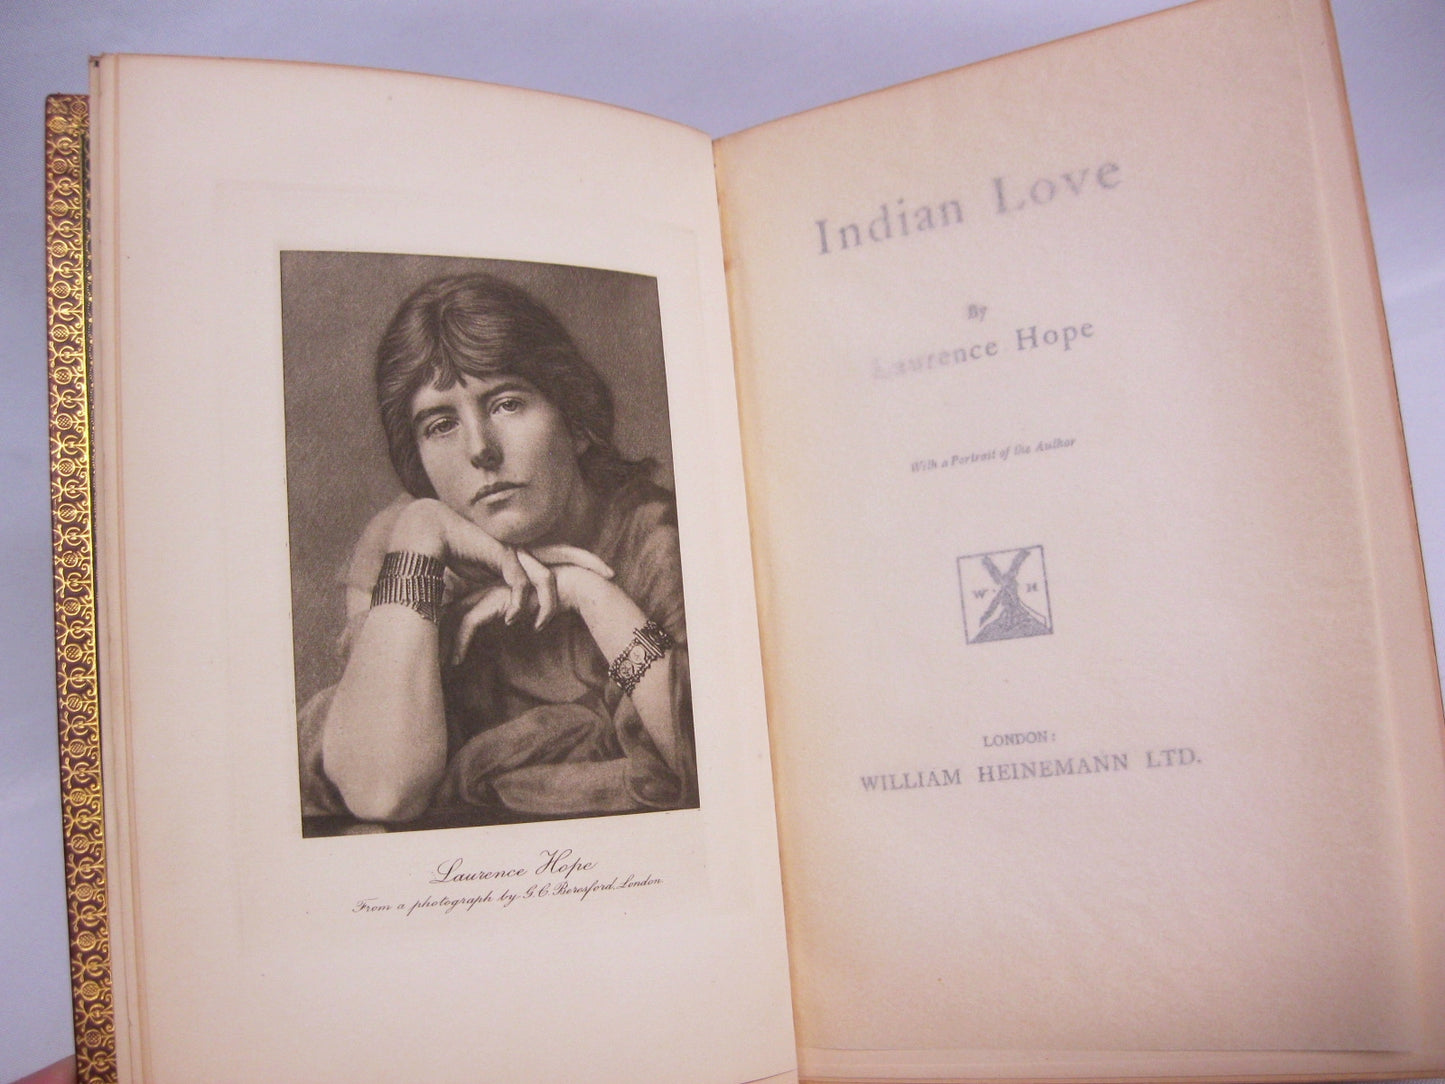 Indian Love by Laurence Hope